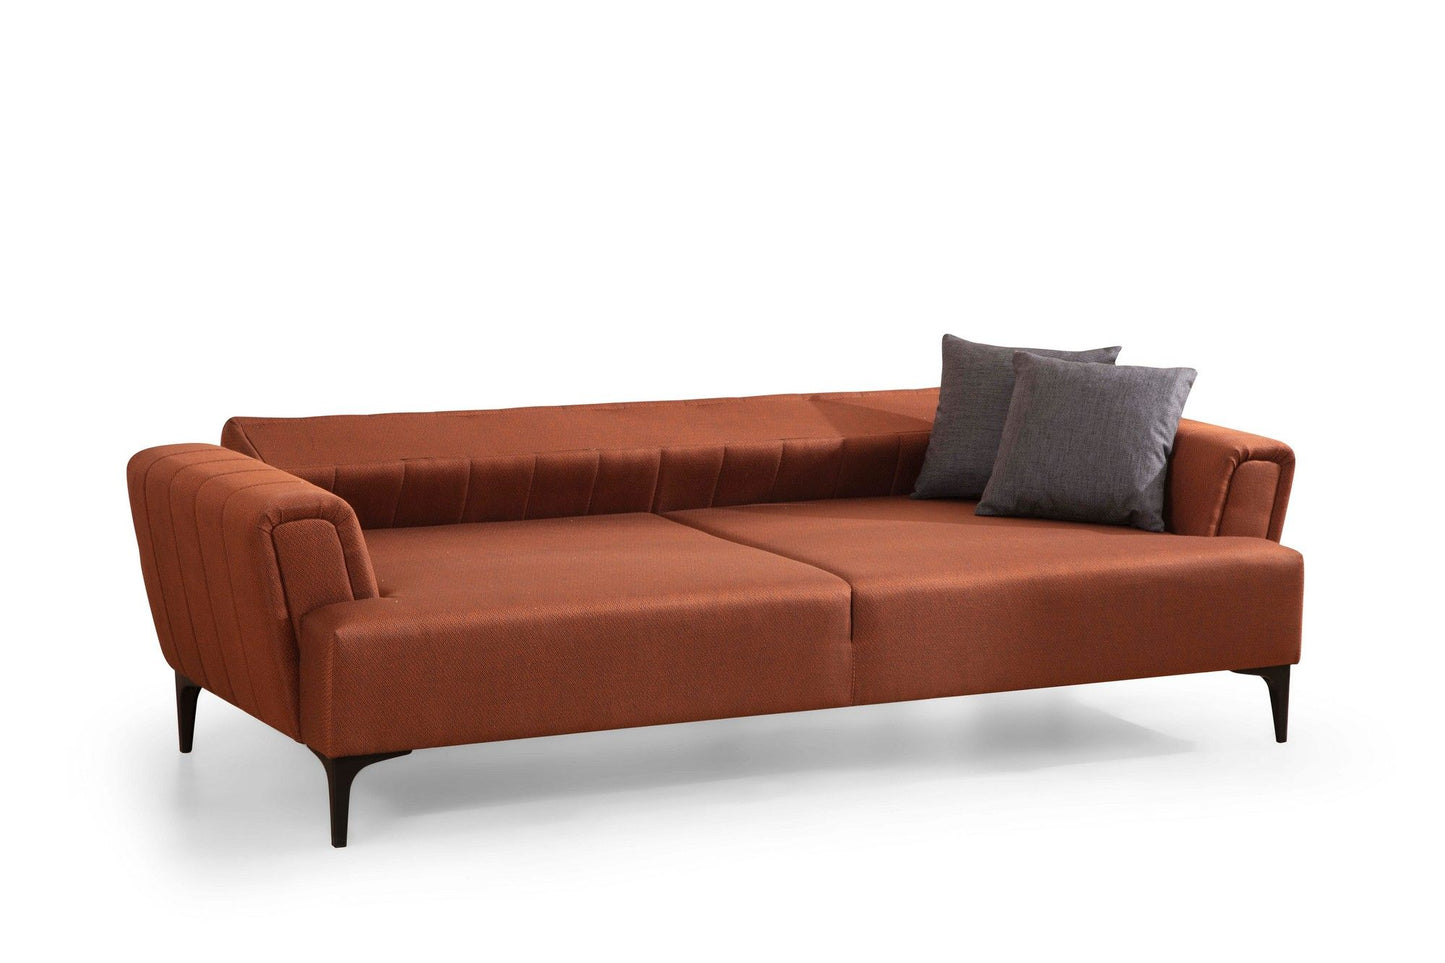 Hamlet - Tile Red - 3-Seat Sofa-Bed